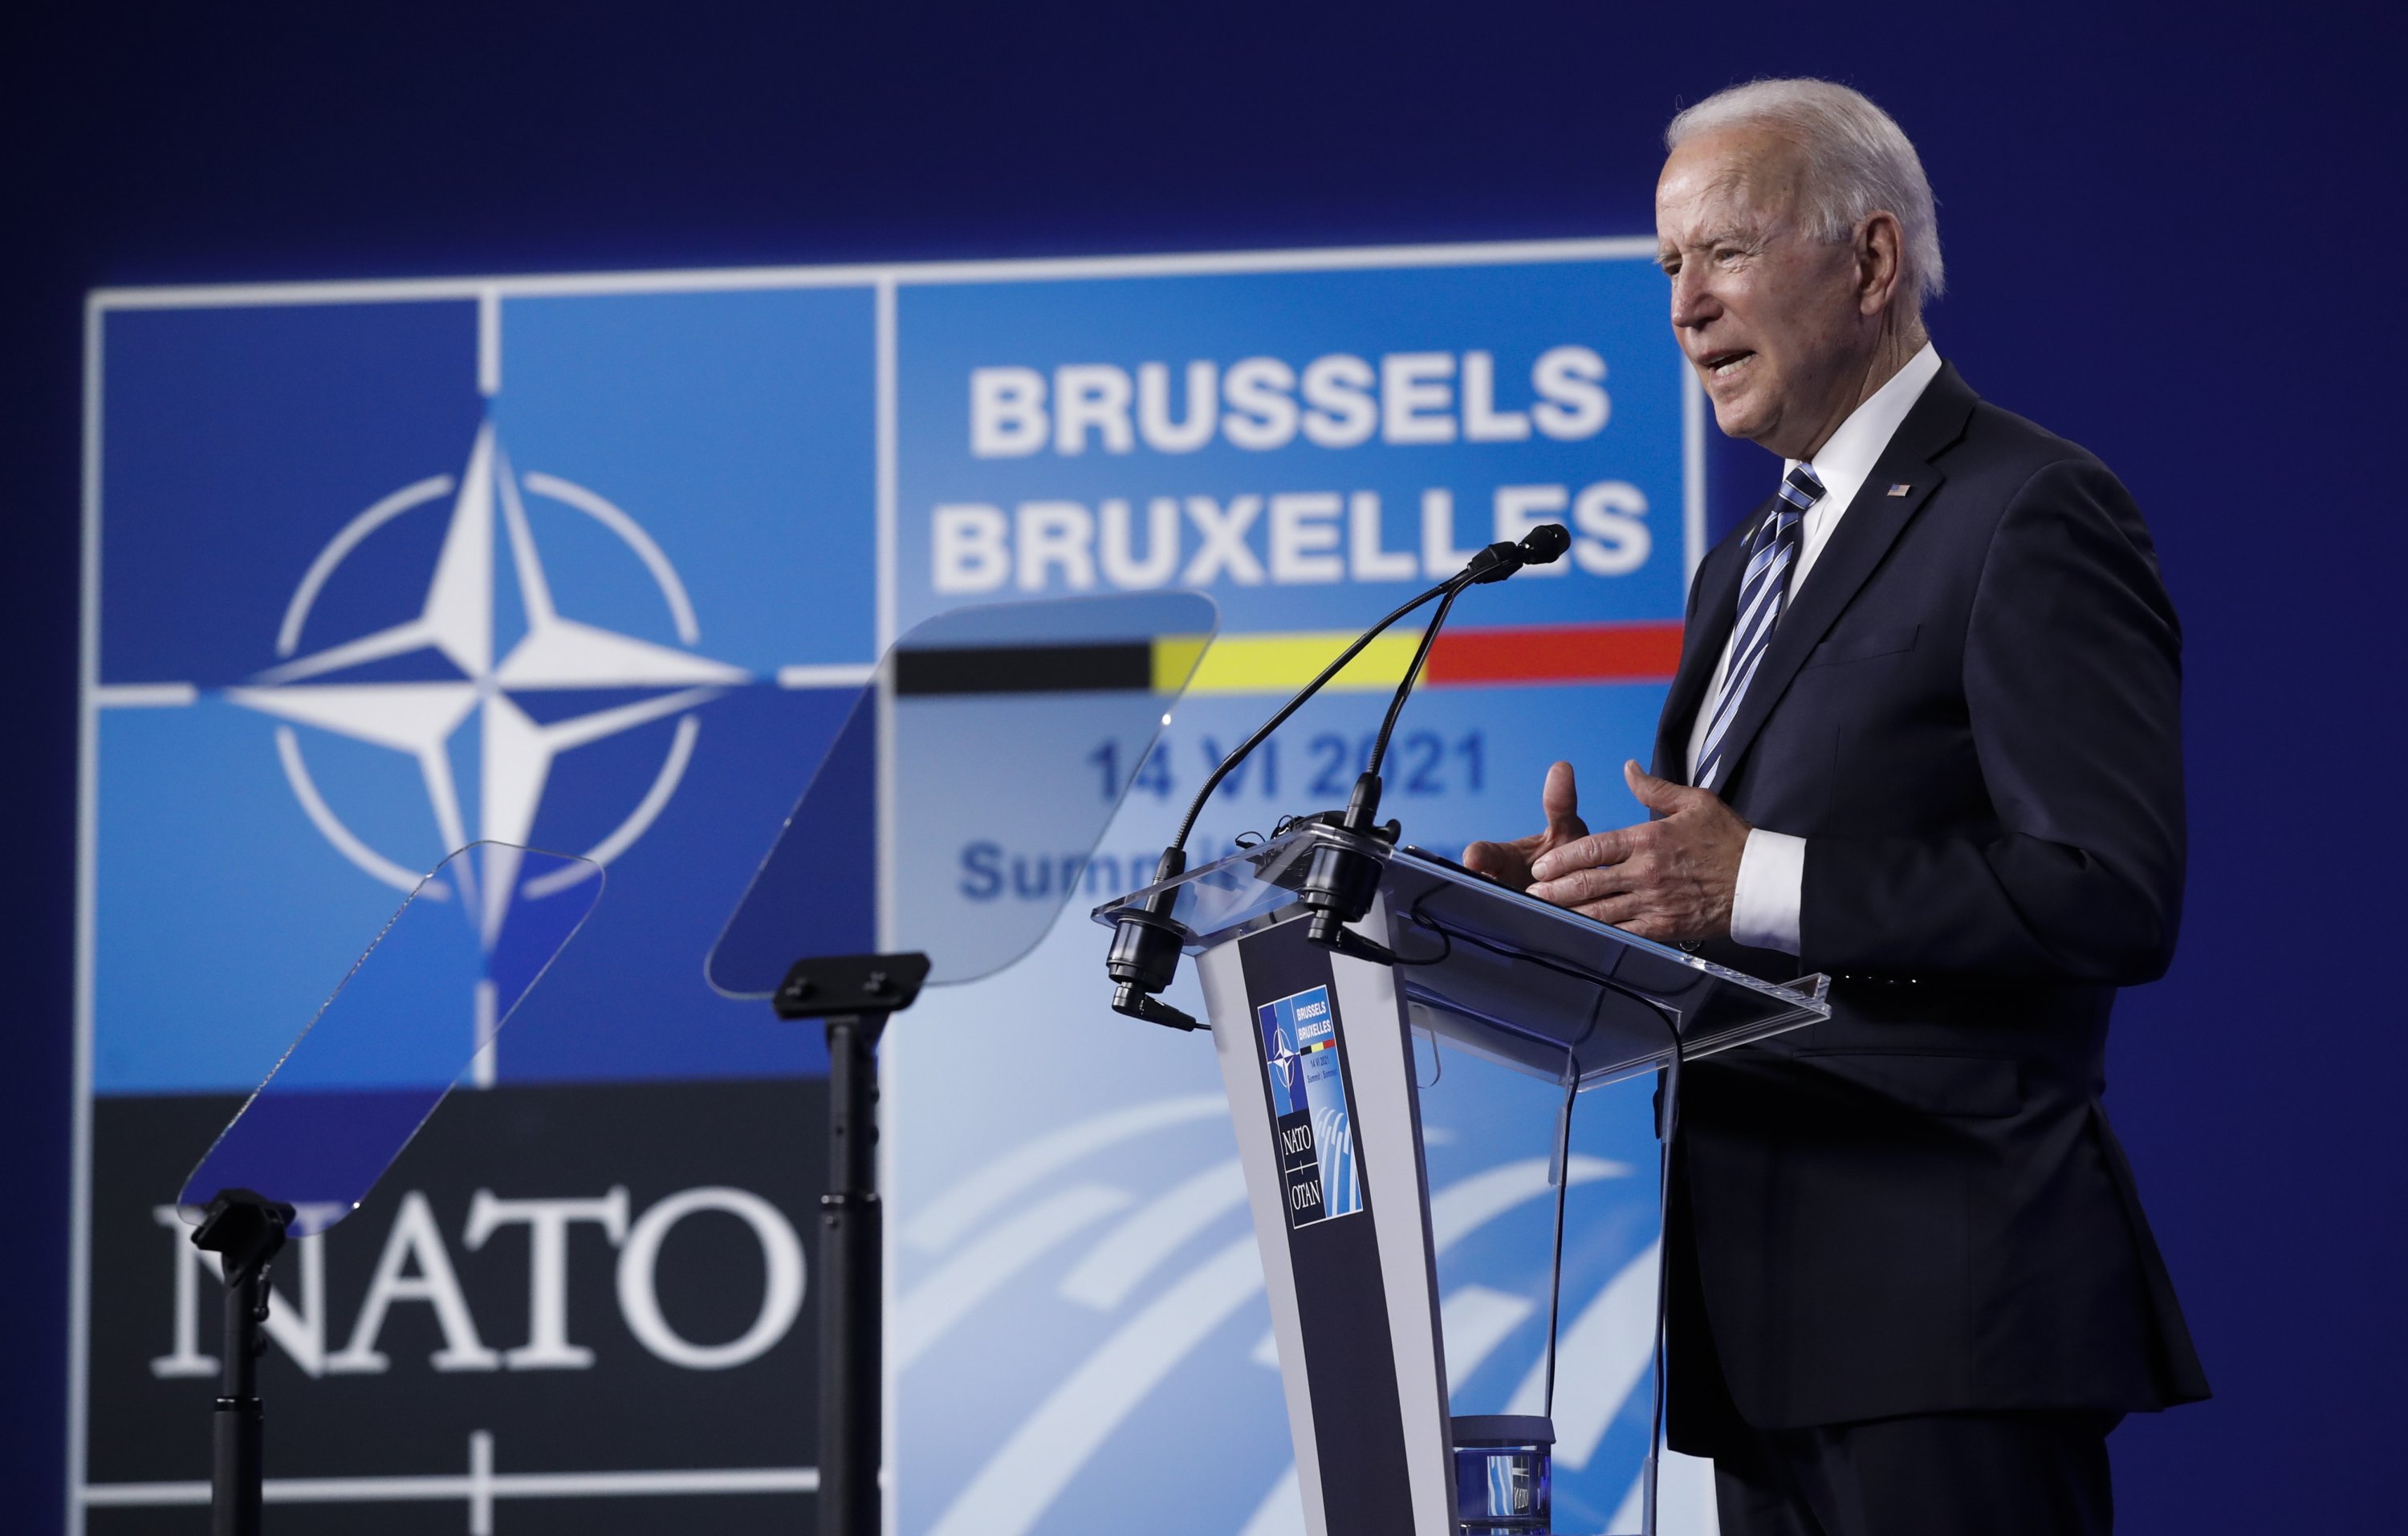 U.S. President Joe Biden gives a press conference during the NATO summit at NATO headquarters in Brussels, Belgium, June 14, 2021. (EPA Photo)